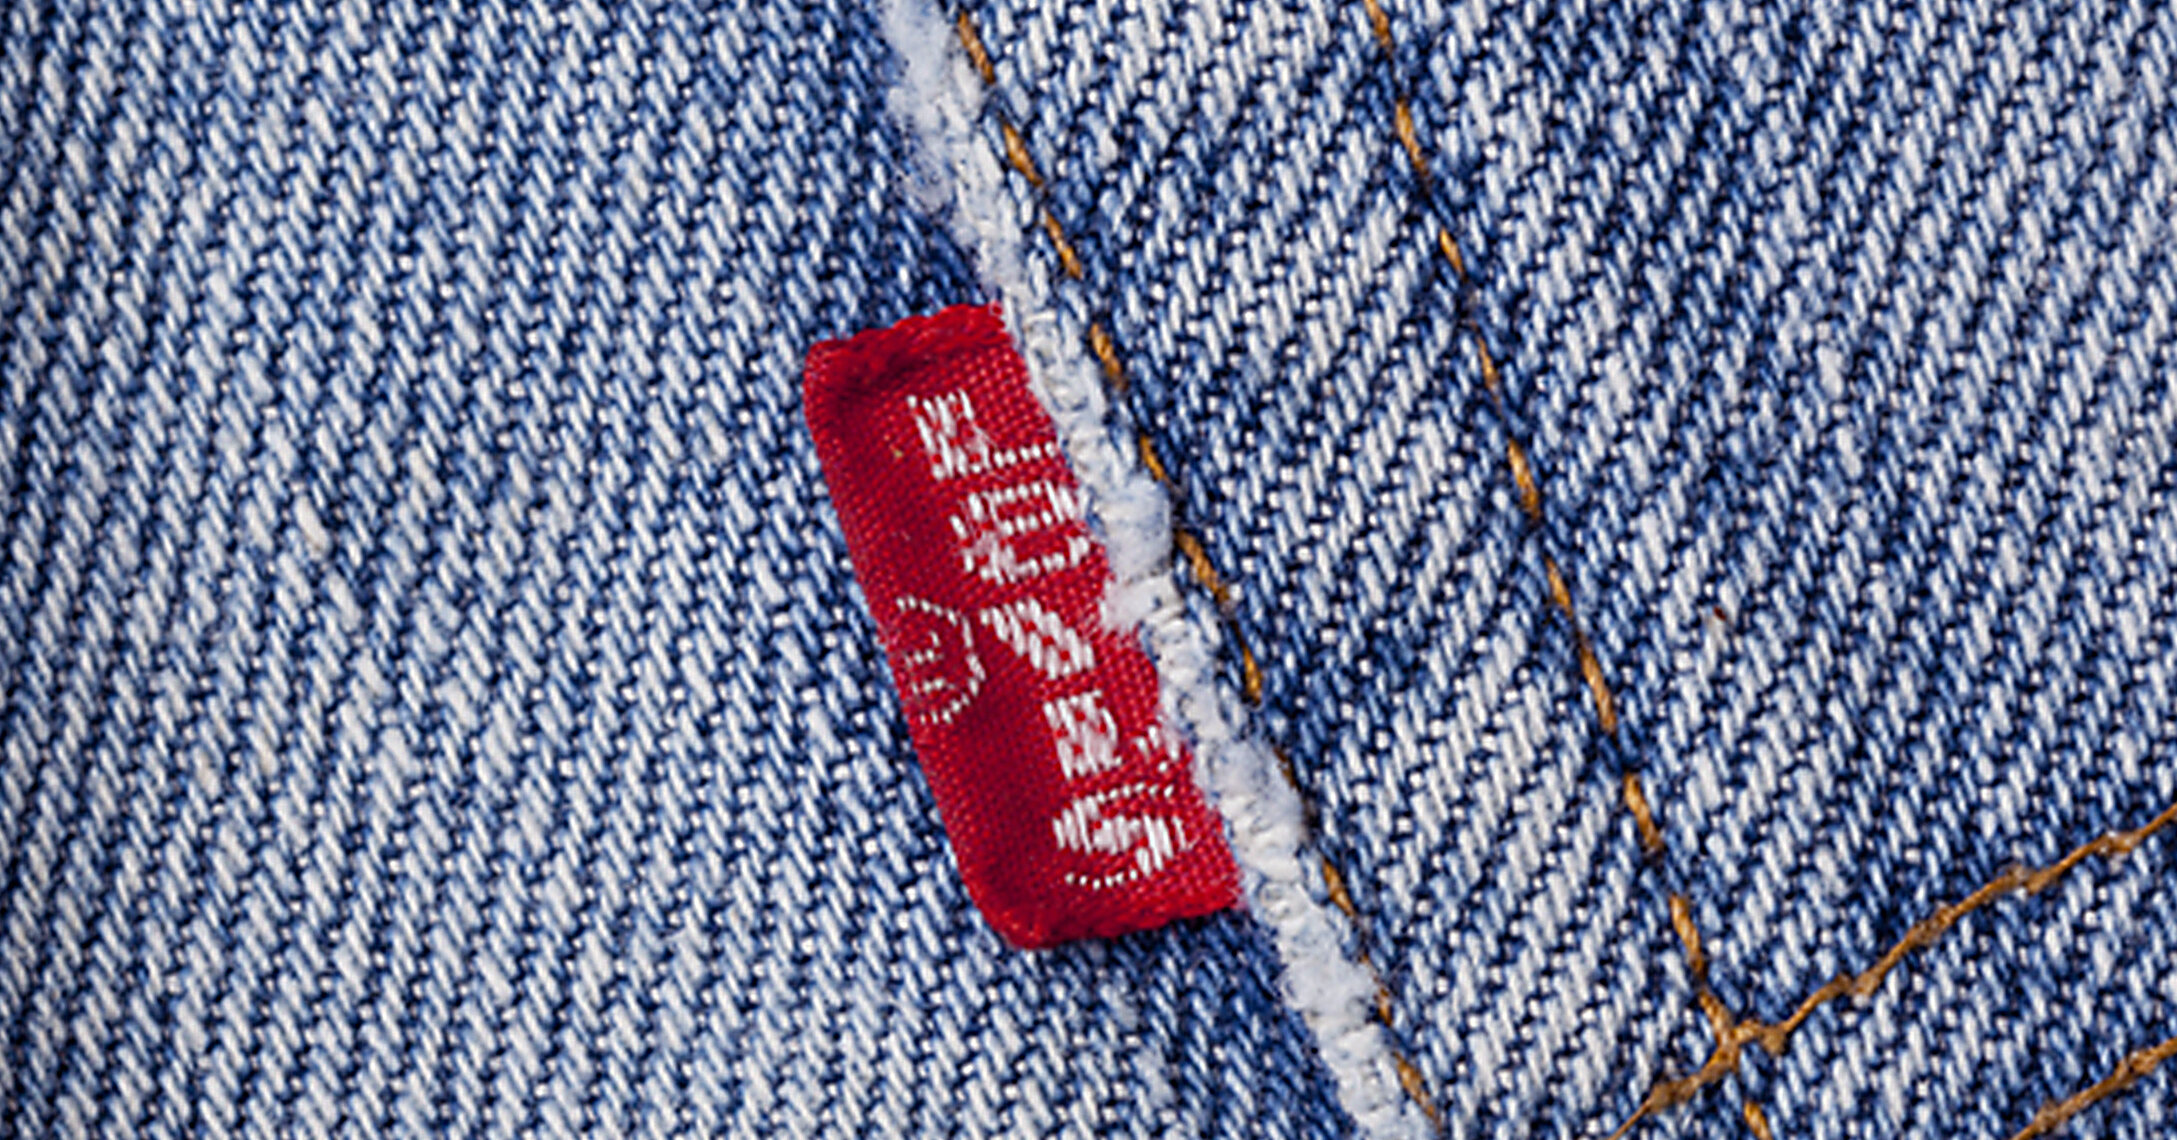 Levi Strauss & Co. and Hohenstein collaborate to bring safer chemicals to  the apparel industry using ECO PASSPORT by OEKO-TEX®